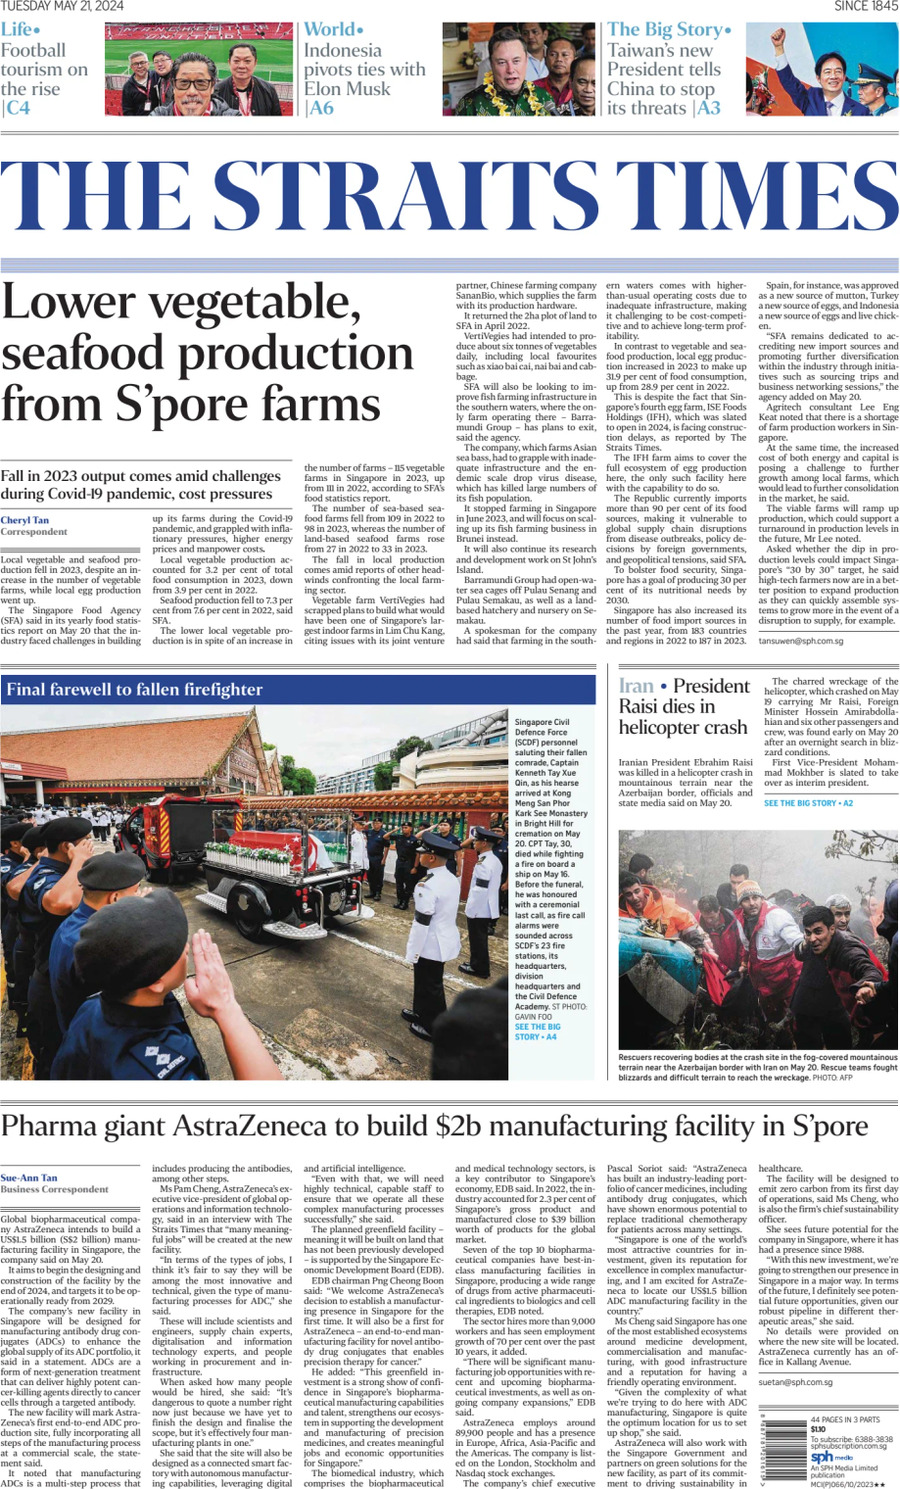 The Straits Times - Front Page - 05/21/2024